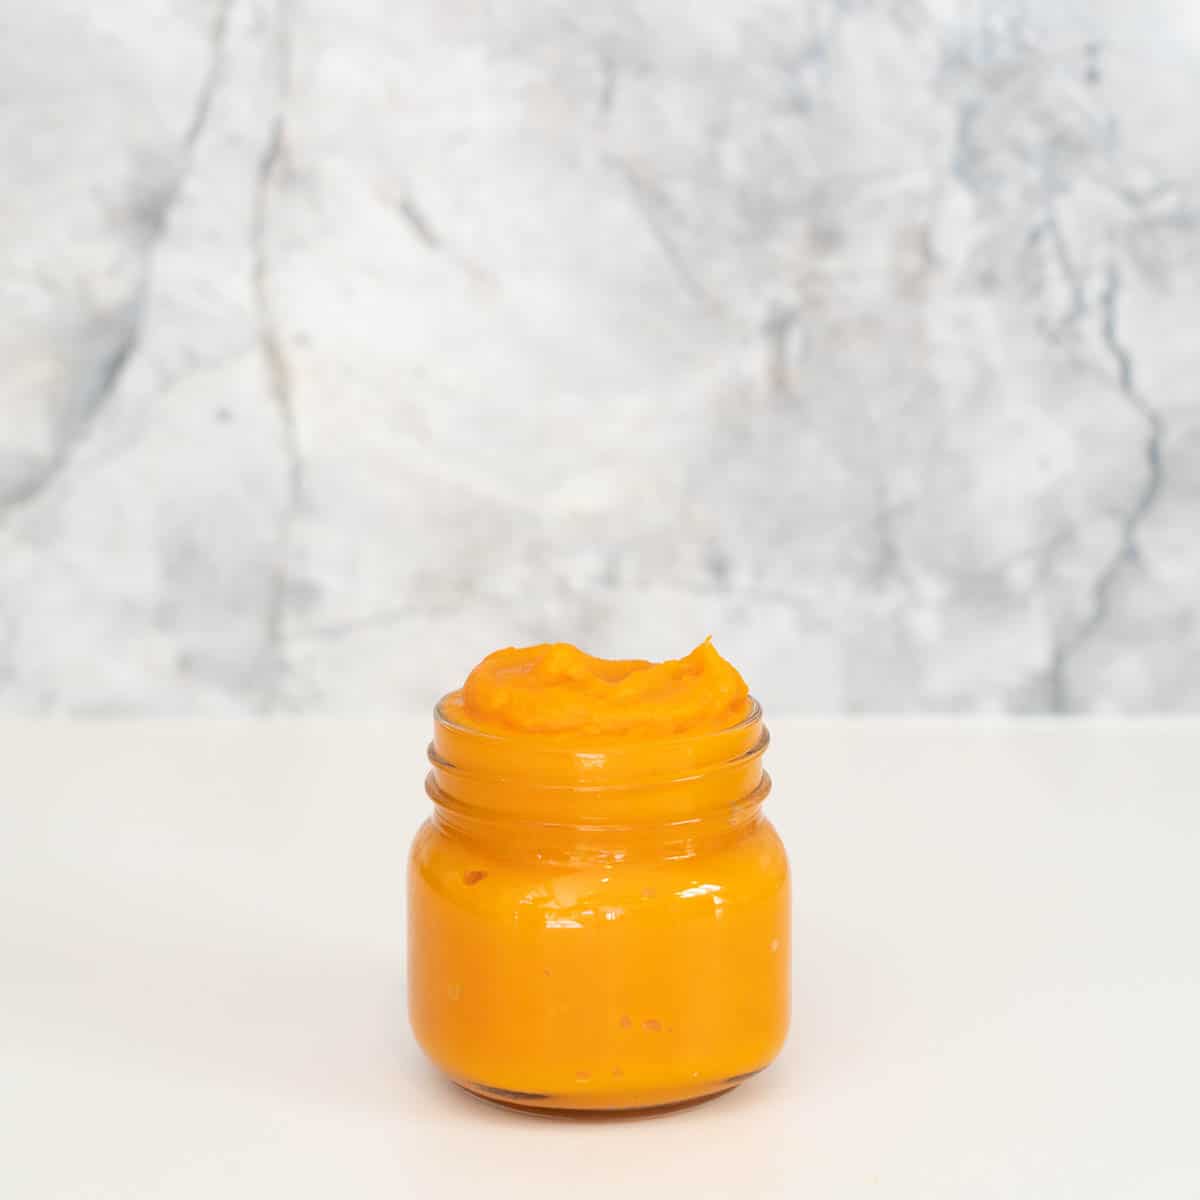 A small glass jar filled with orange baby puree